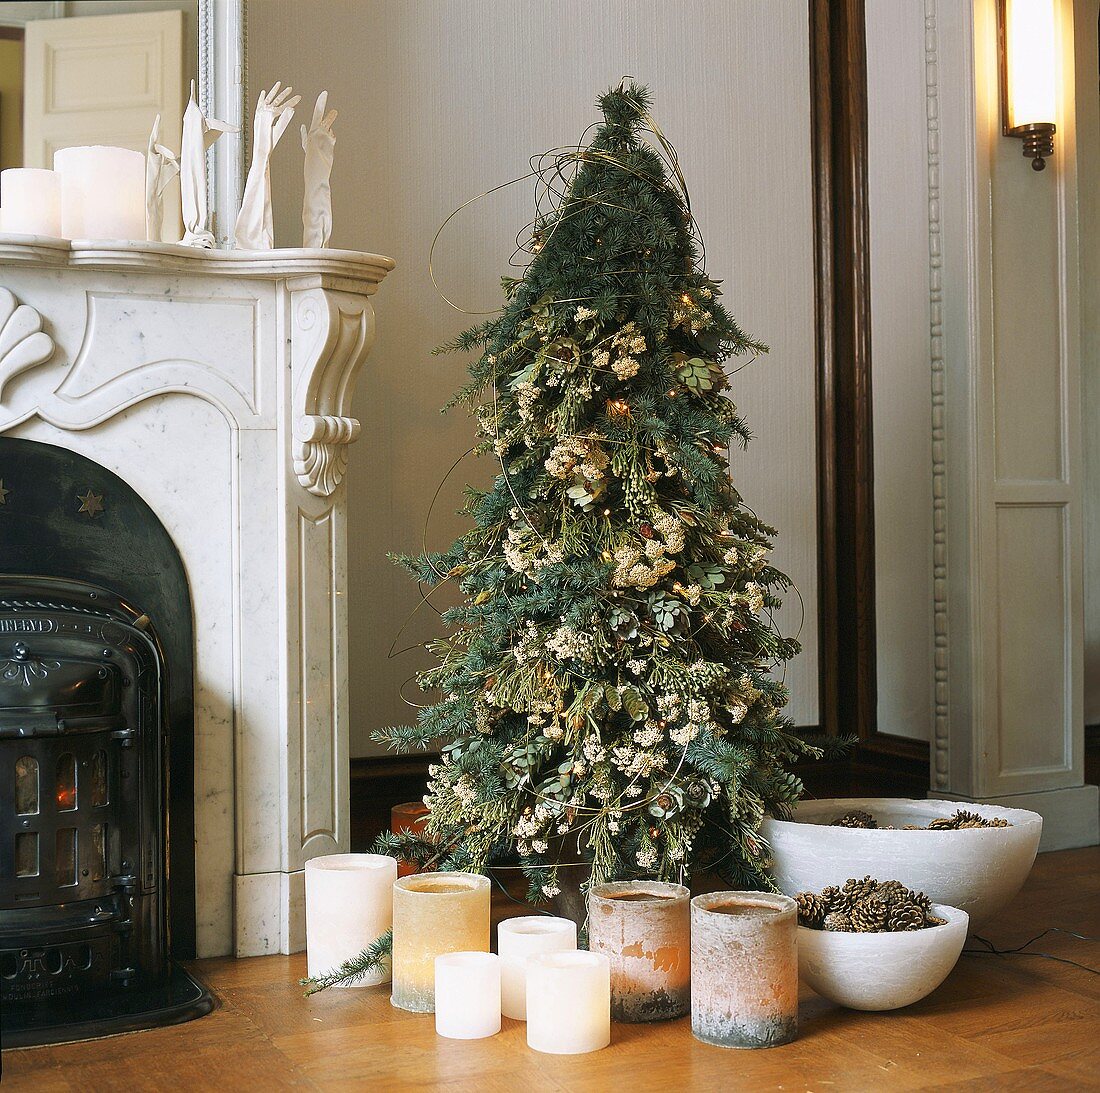 Christmas tree and rustic stump candles next to antique fireplace